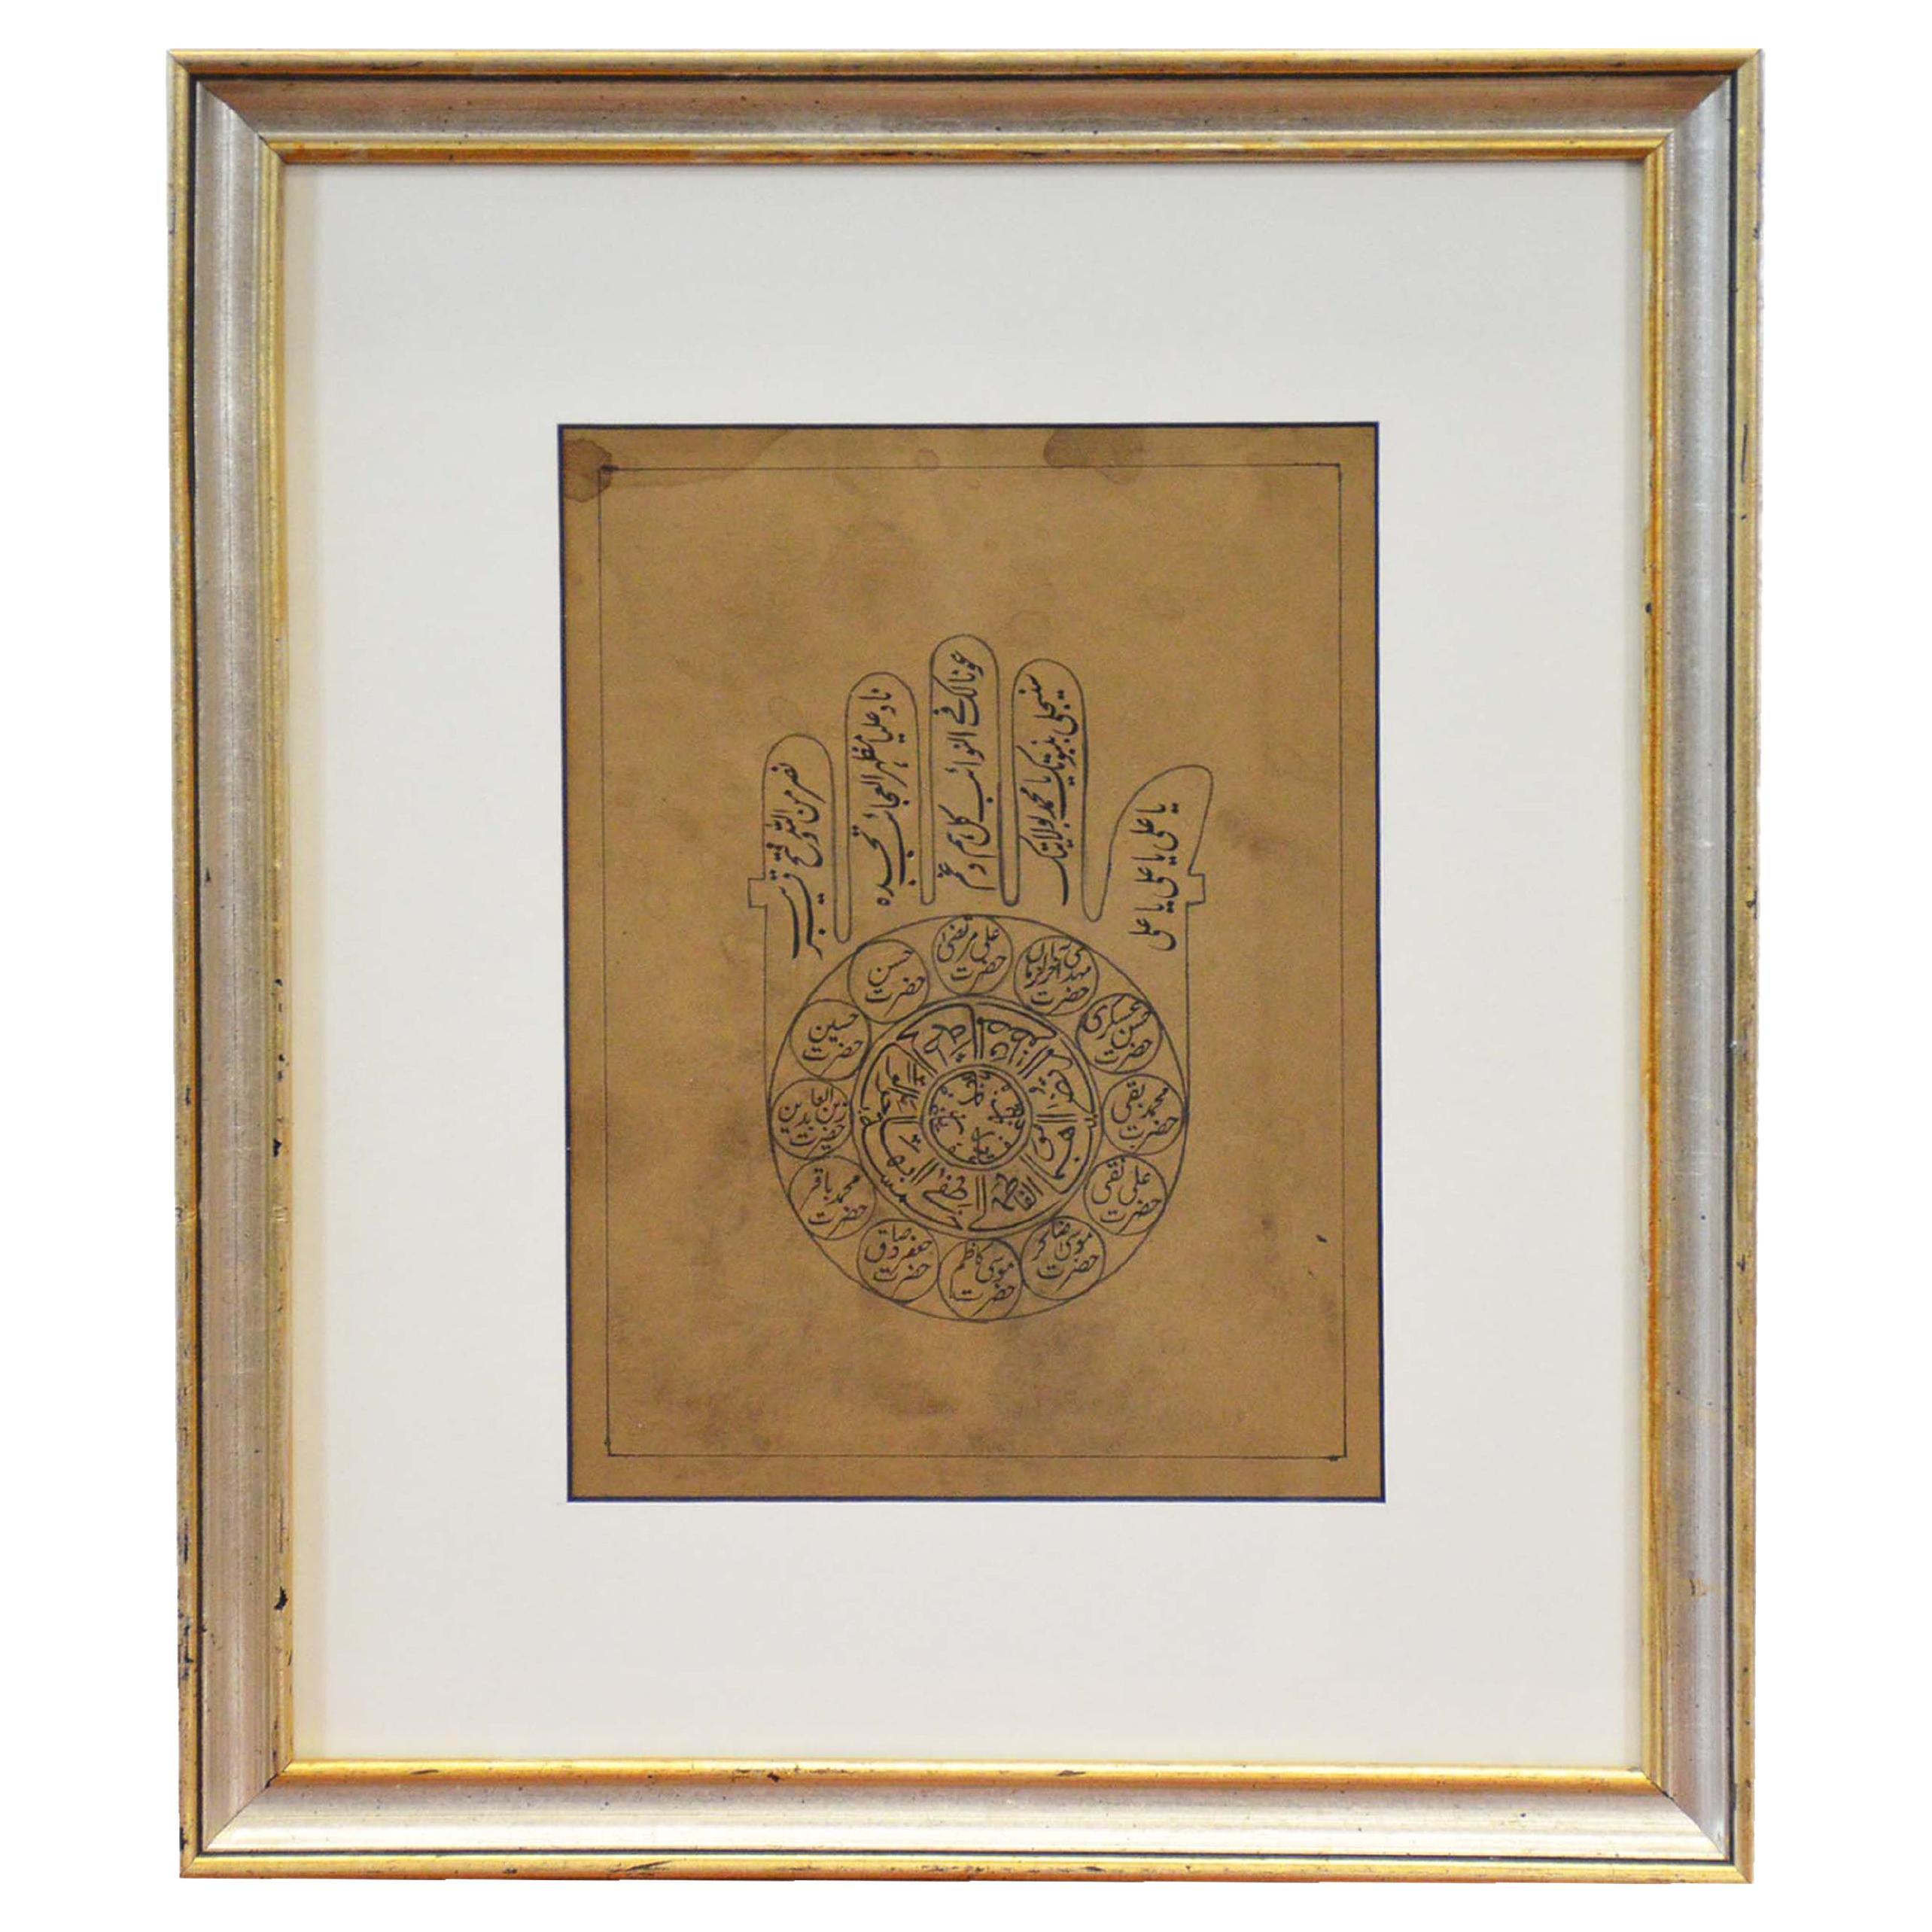 Astrological Hand-Painted on Parchment Print Depicting a Hand with Calligraphy For Sale